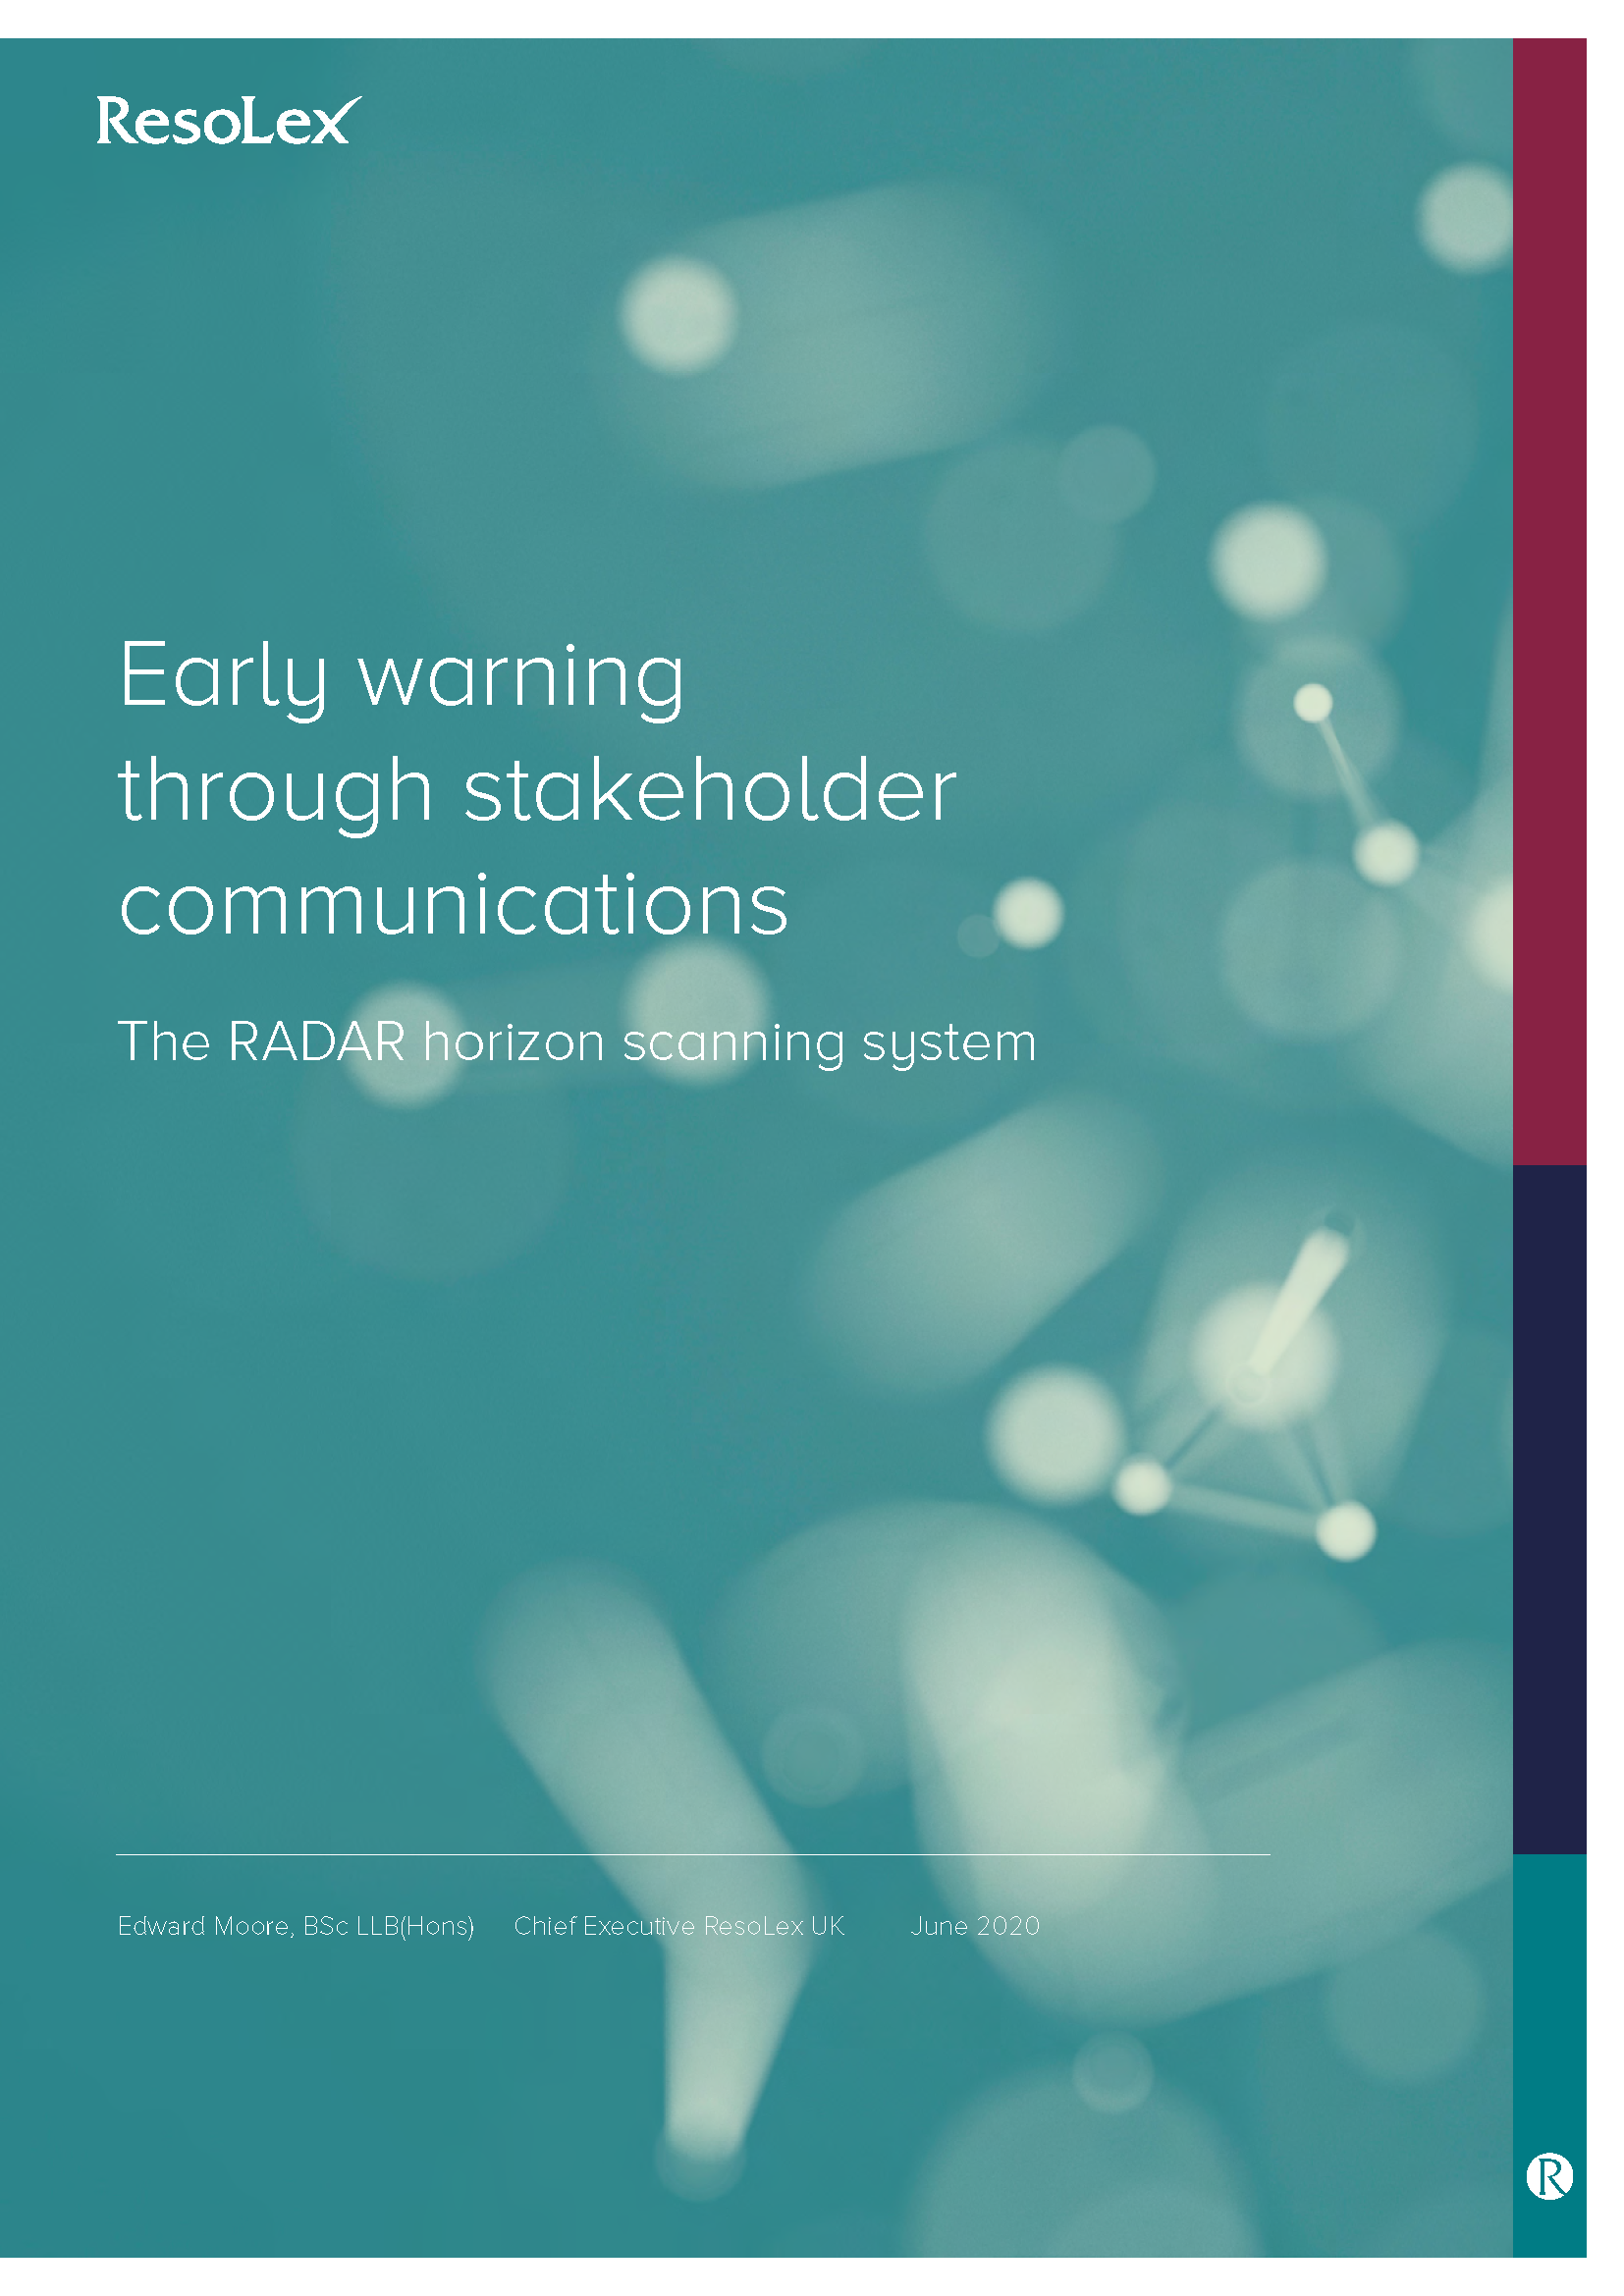 Early warning through stakeholder communications